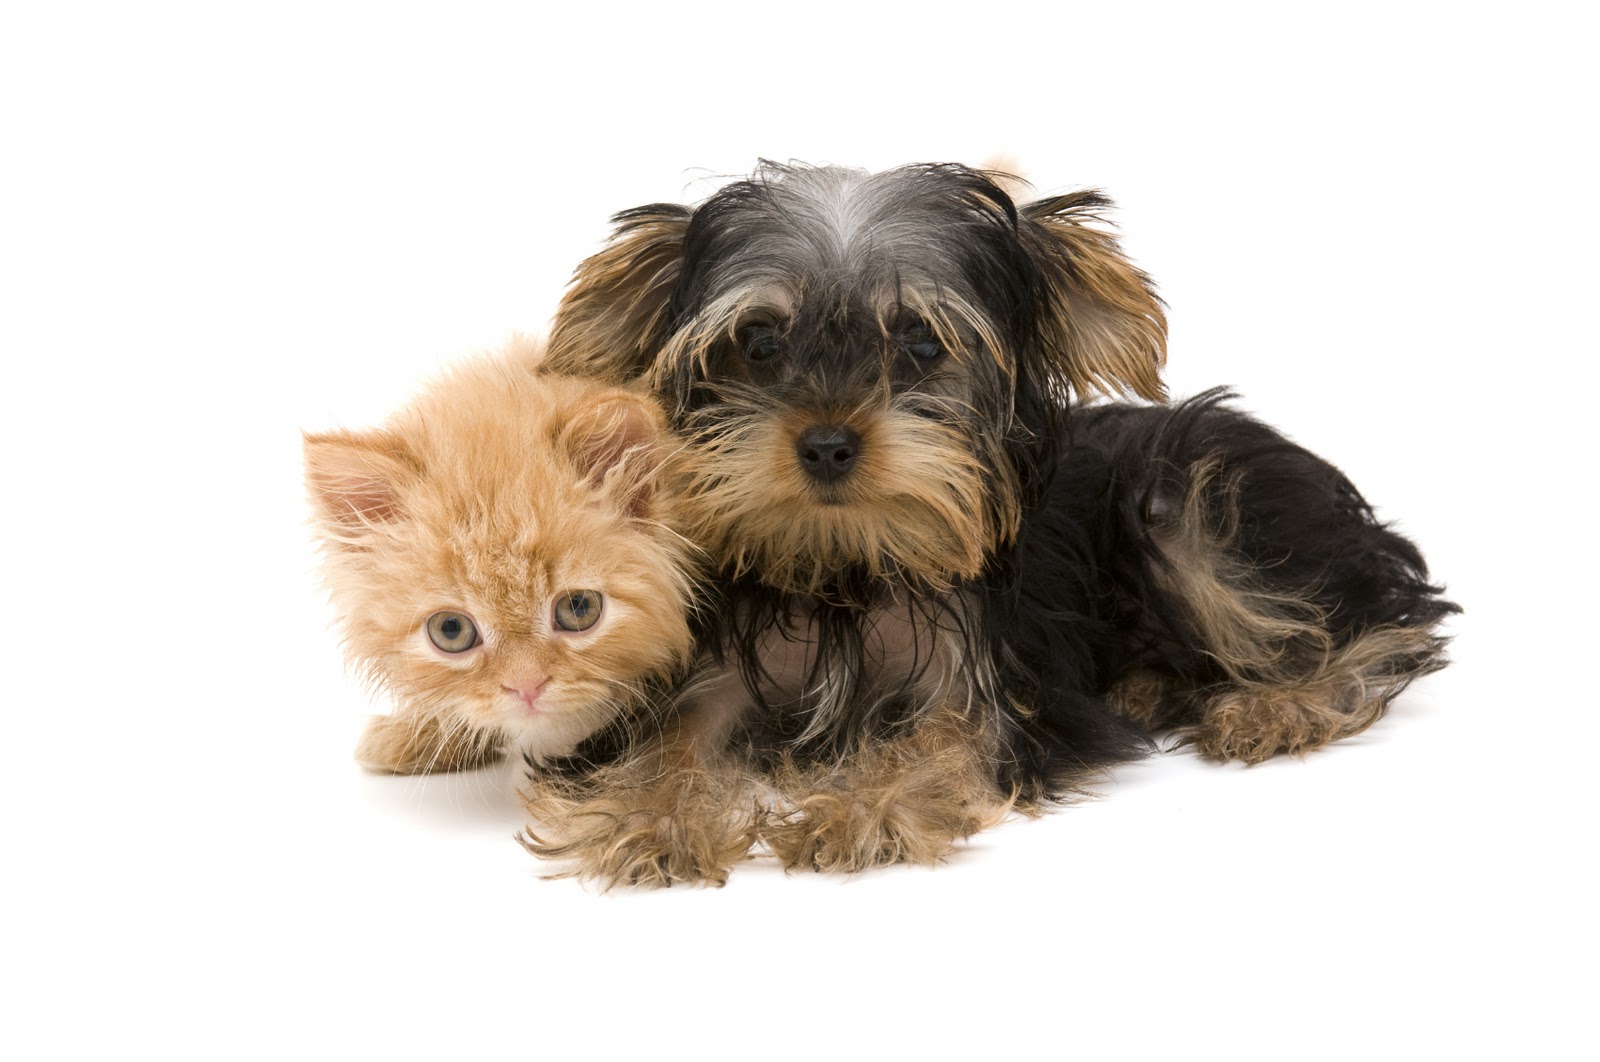 Kittens and Puppy Pics Cat Pictures Blog